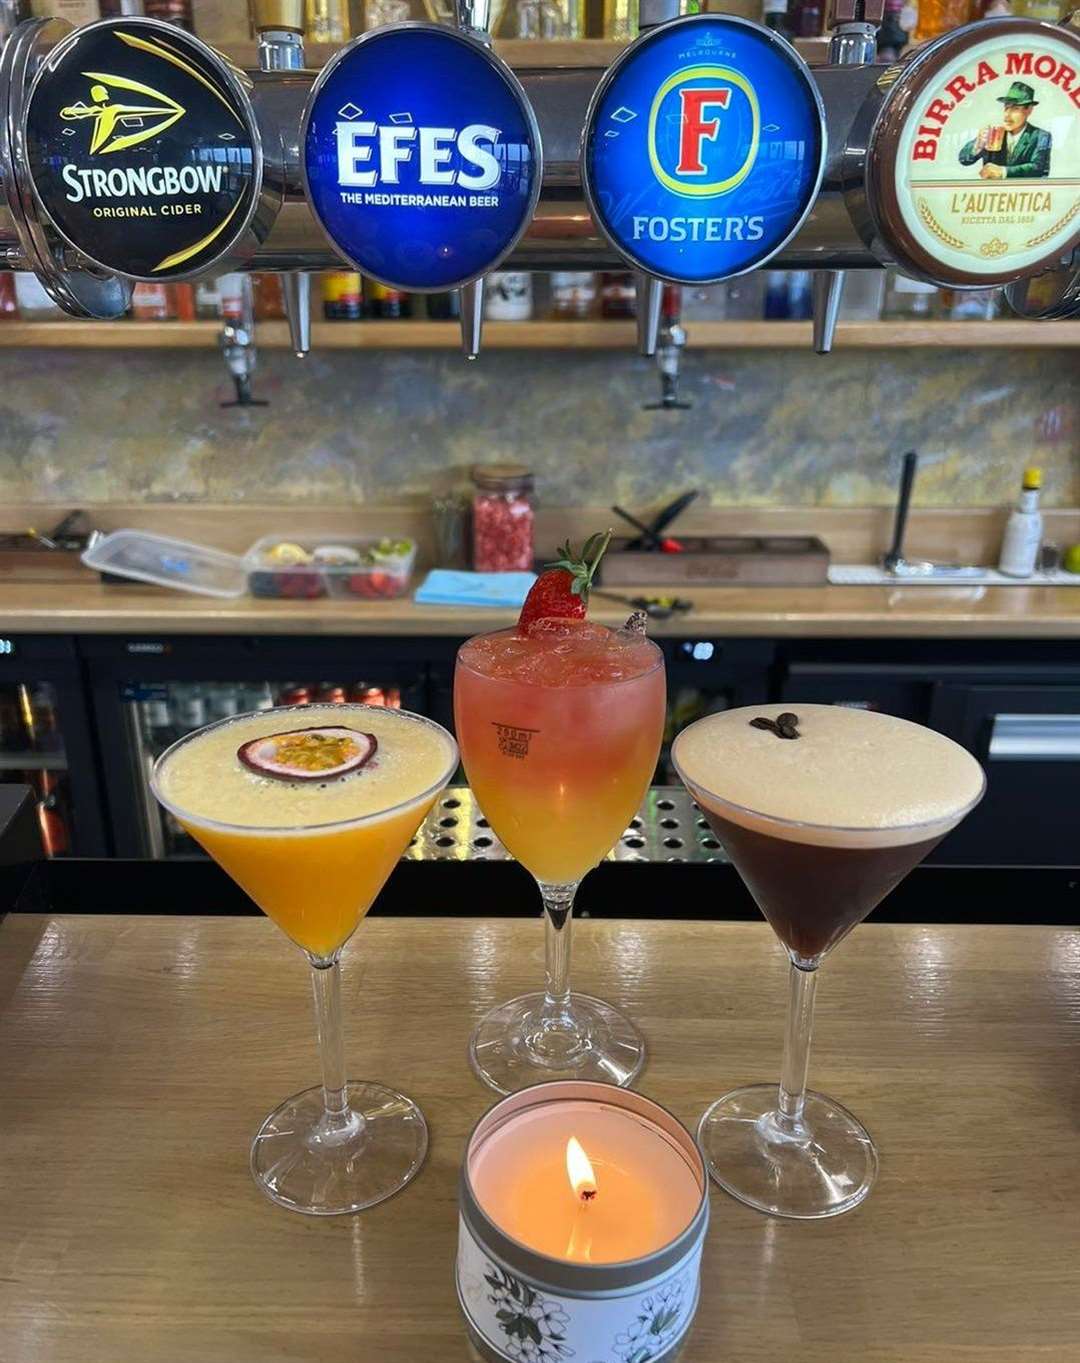 New cocktails have also been showcased in recent days. Picture: Love Fish Bar & Restaurant Facebook